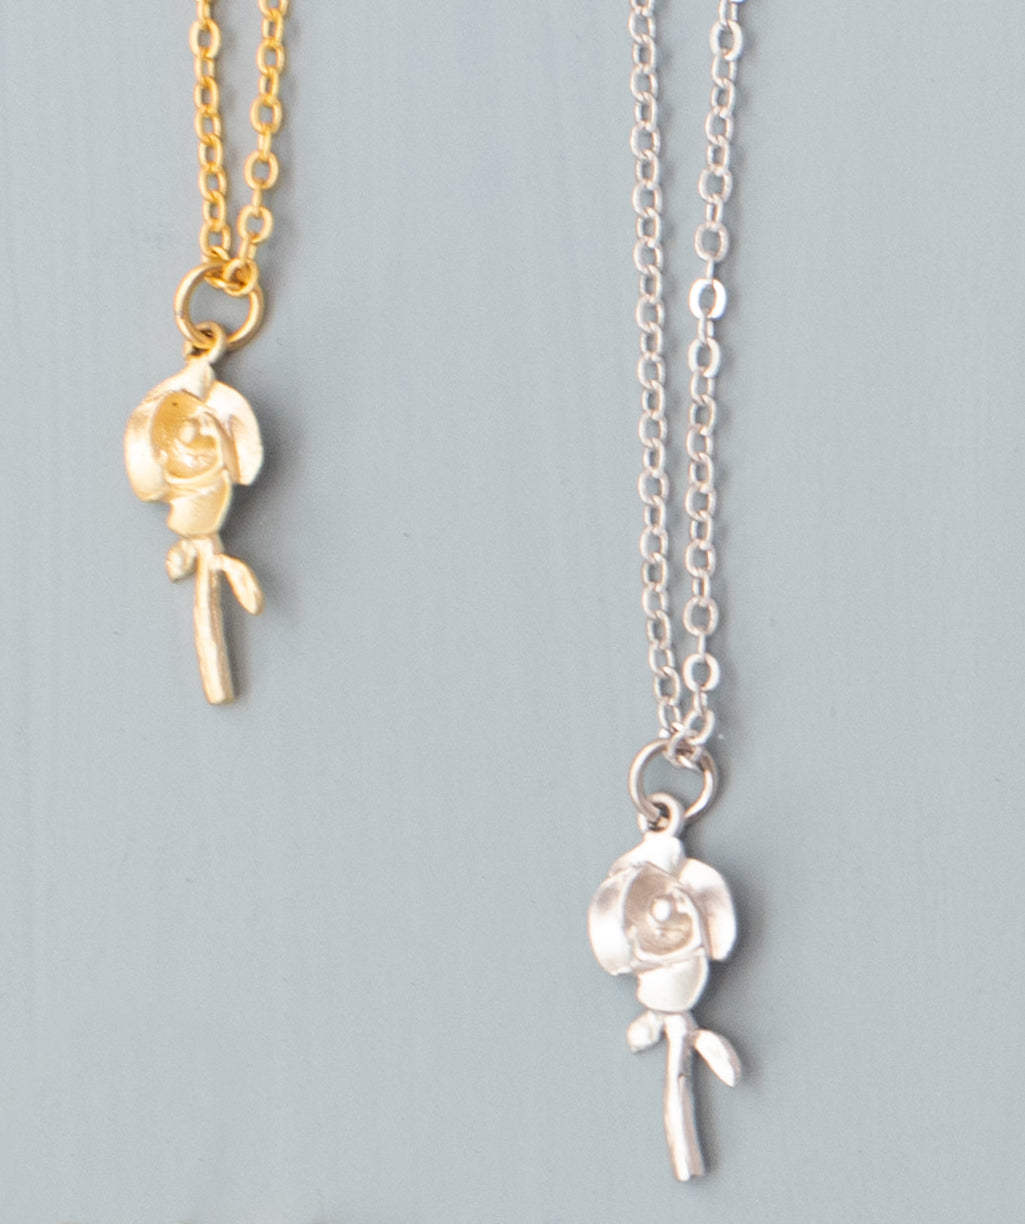 Rose Flower Charm Necklace